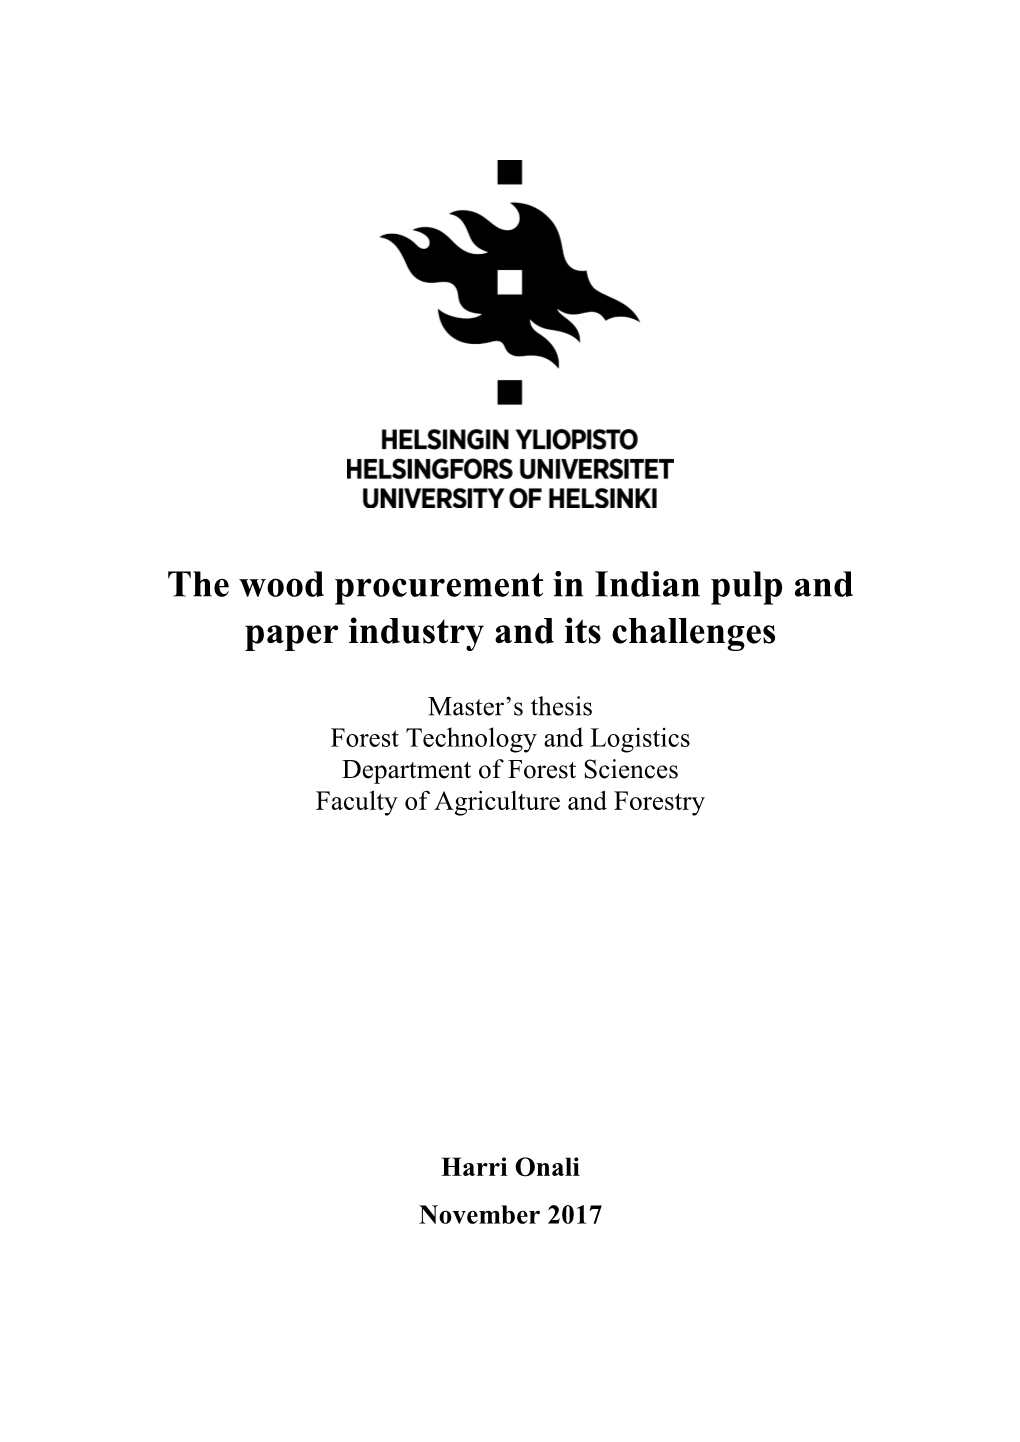 The Wood Procurement in Indian Pulp and Paper Industry and Its Challenges